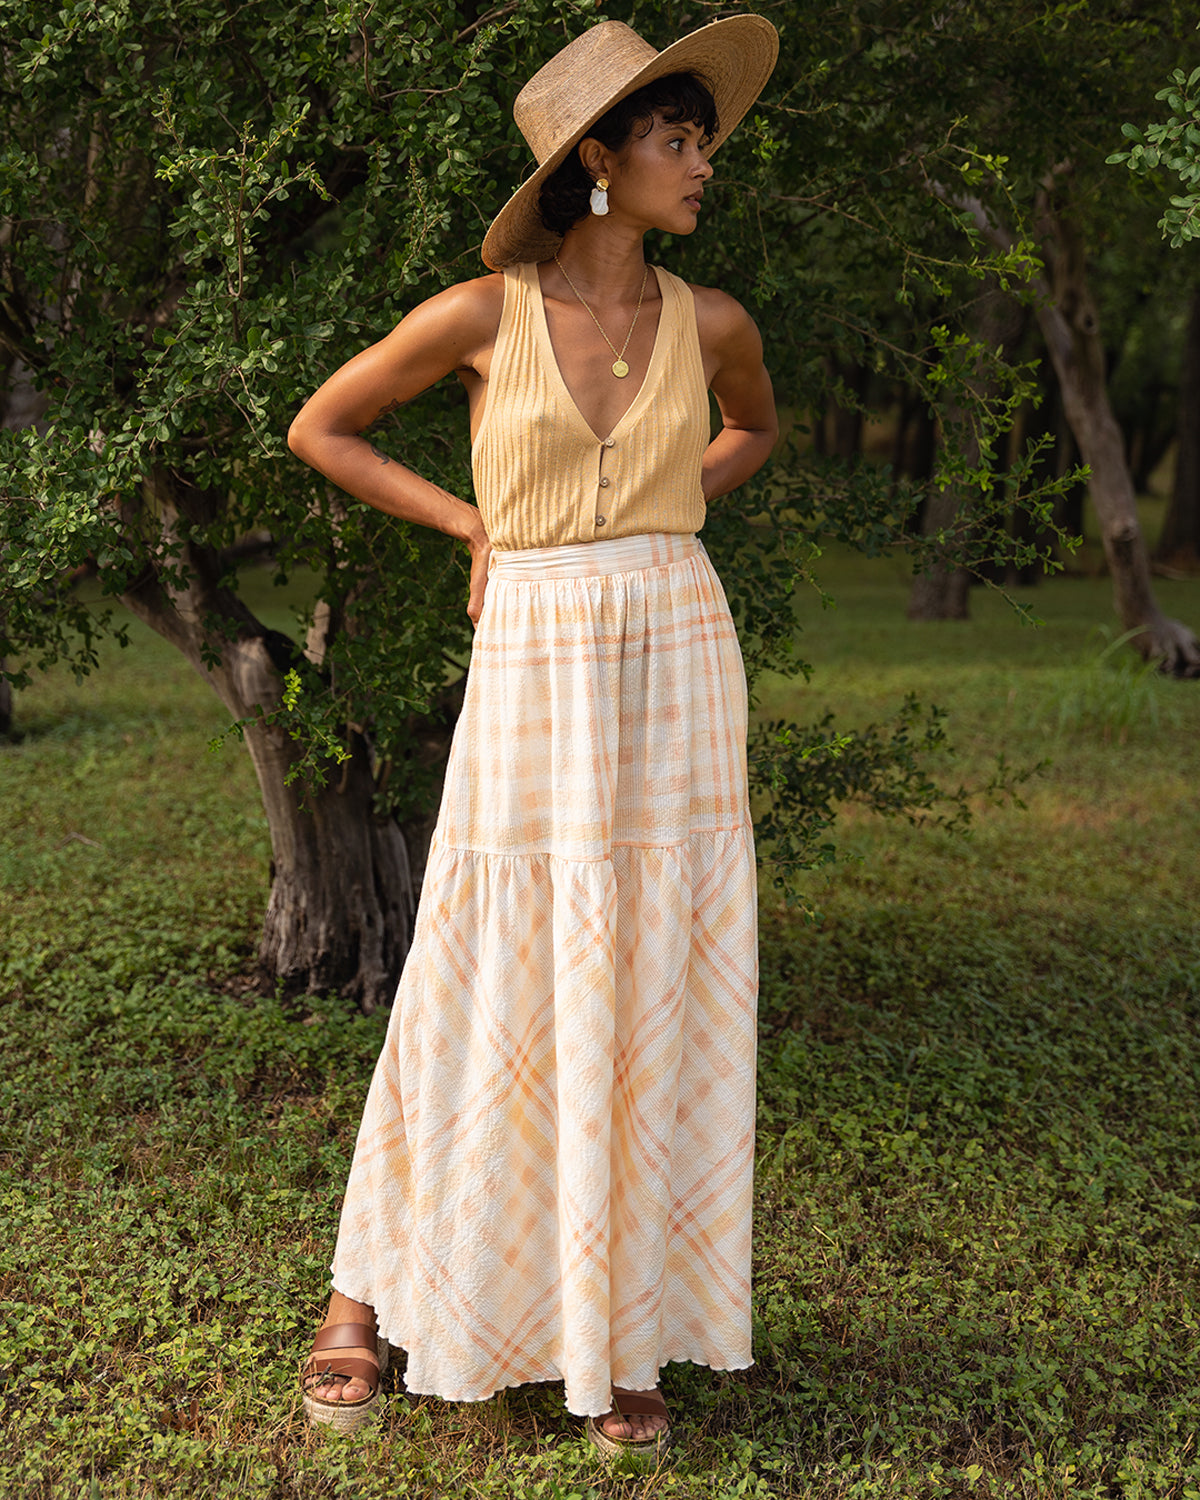 Lightweight maxi skirt with gingham print detail and effortless style